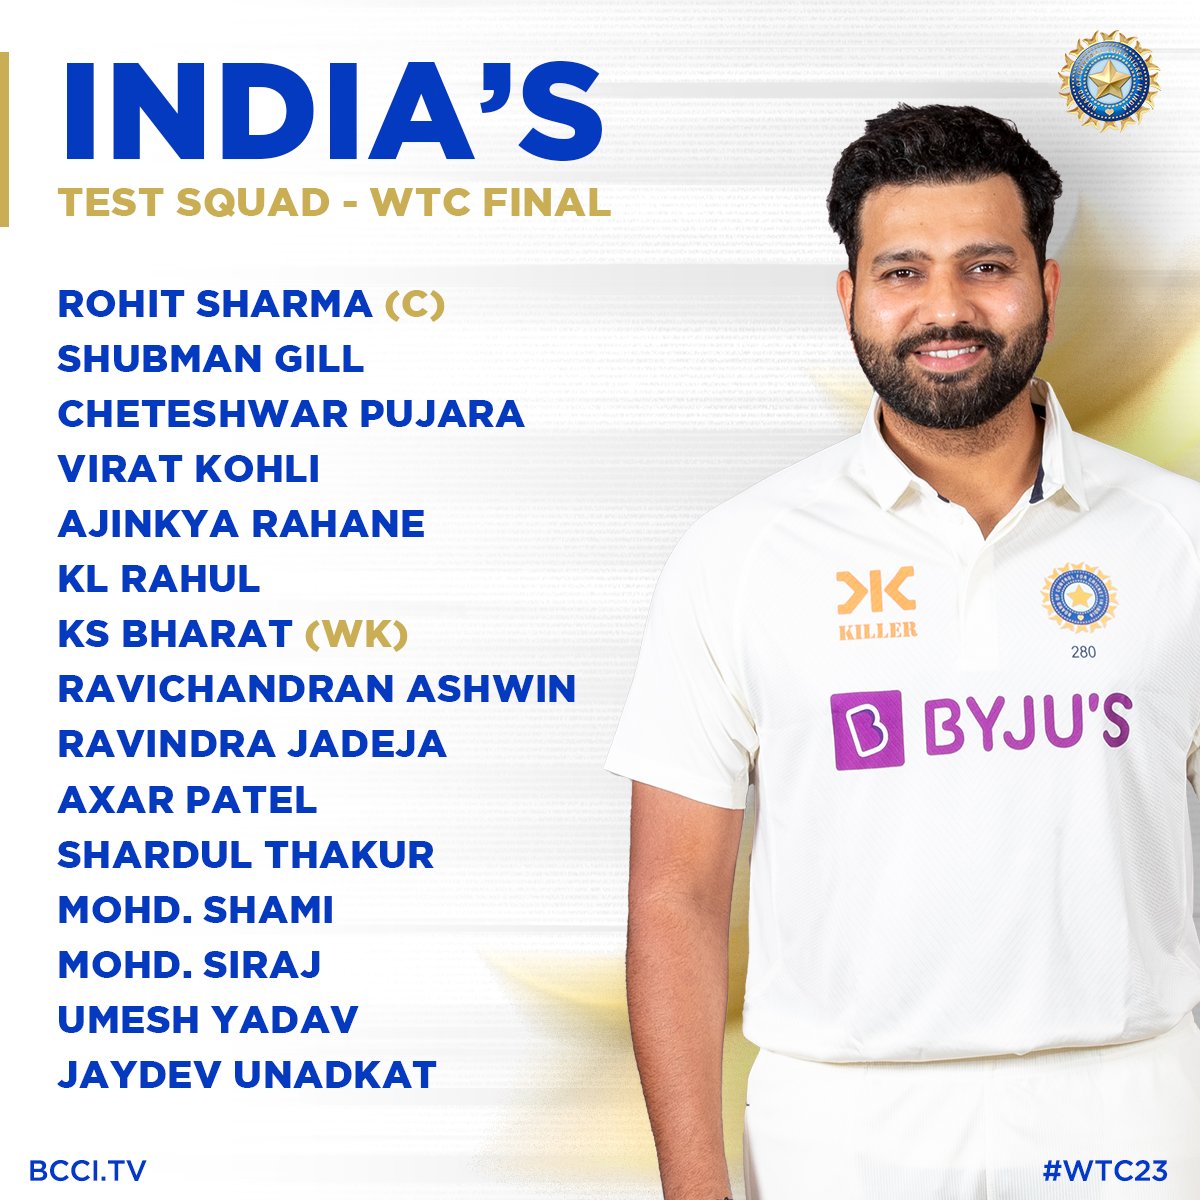 BCCI on Twitter: "🚨 NEWS 🚨 #TeamIndia squad for ICC World Test Championship 2023 Final announced. Details 🔽 #WTC23 https://t.co/sz7F5ByfiU https://t.co/KIcH530rOL" / Twitter